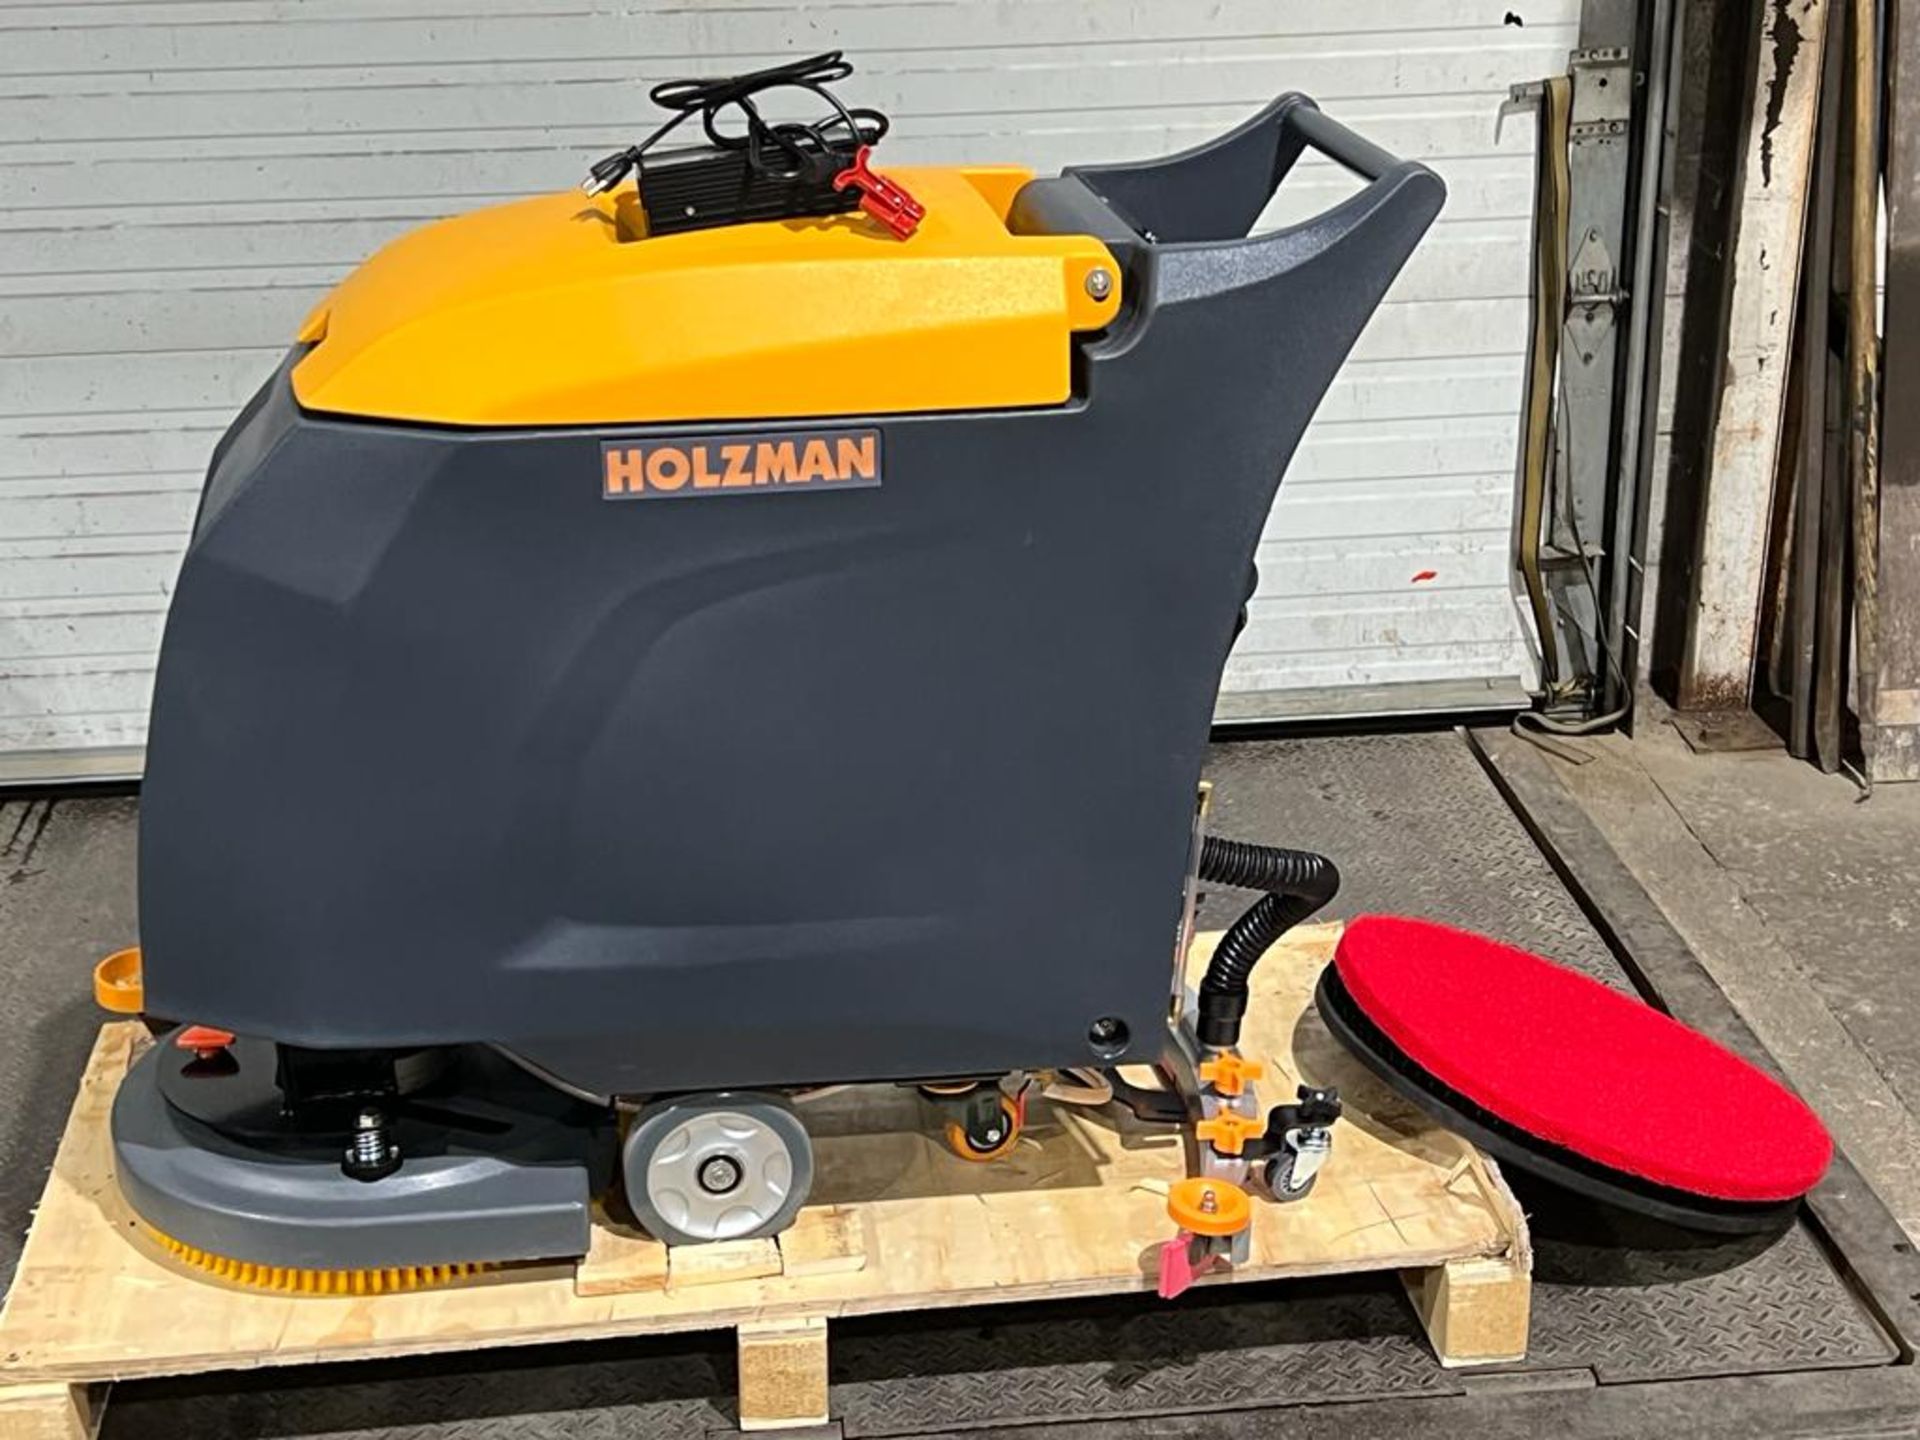 Holzman MINT Walk Behind Floor Sweeper Scrubber Unit model M50 - BRAND NEW with extra pads, digital